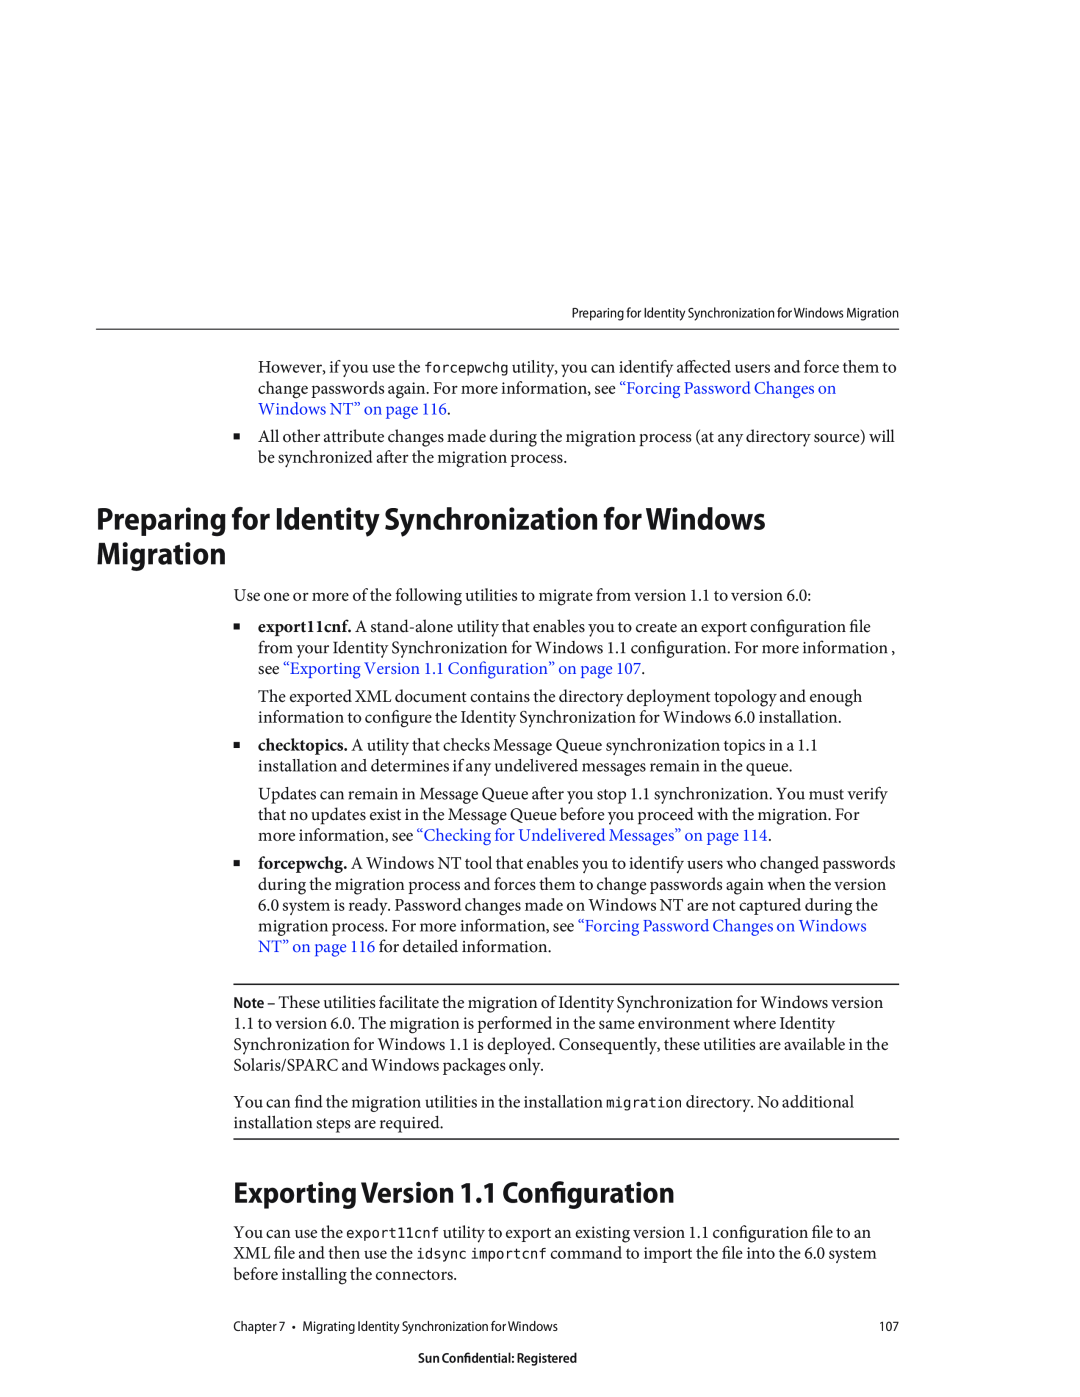 Sun Microsystems 8190994 Preparing for Identity Synchronization for Windows Migration, Exporting Version 1.1 Configuration 